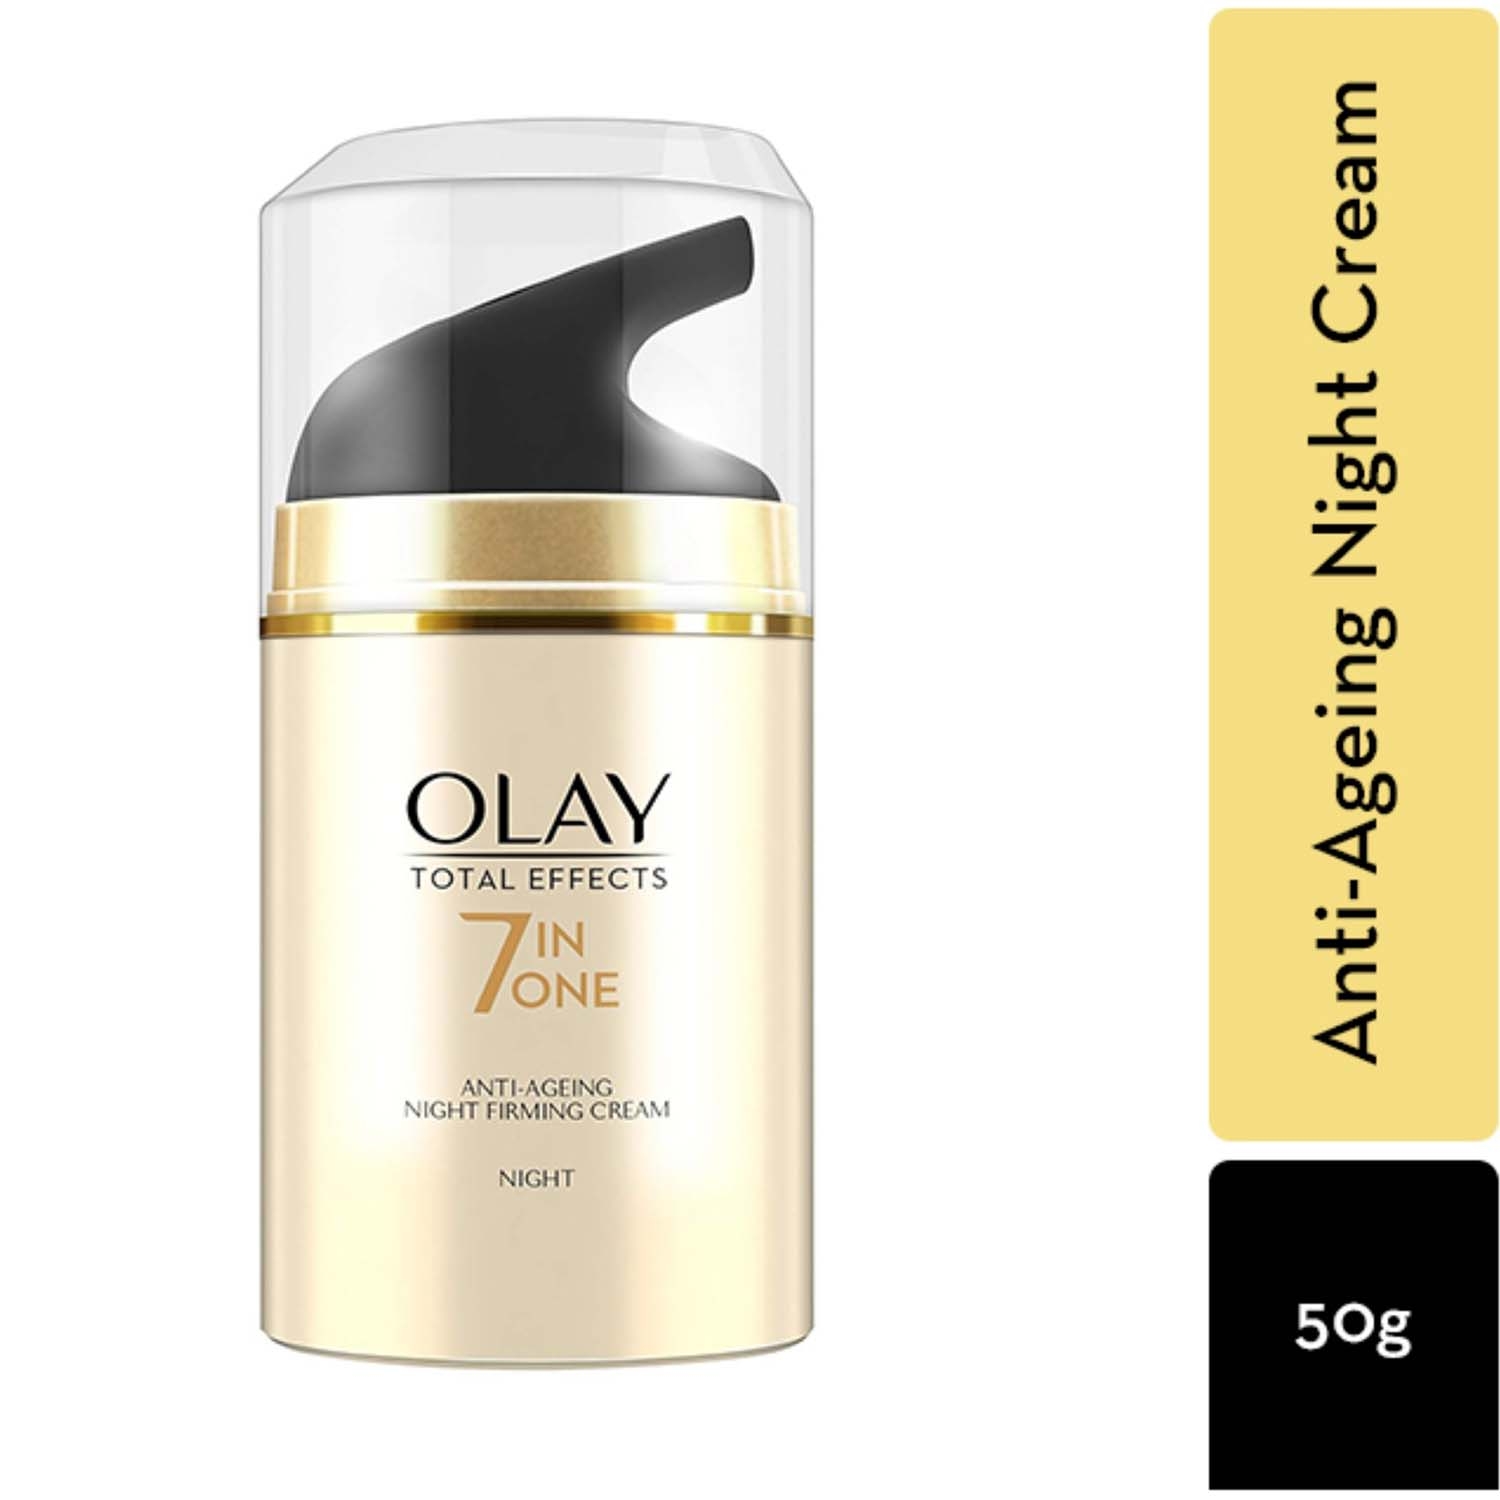 Olay | Olay 7-In-1 Total Effects Night Cream (50g)